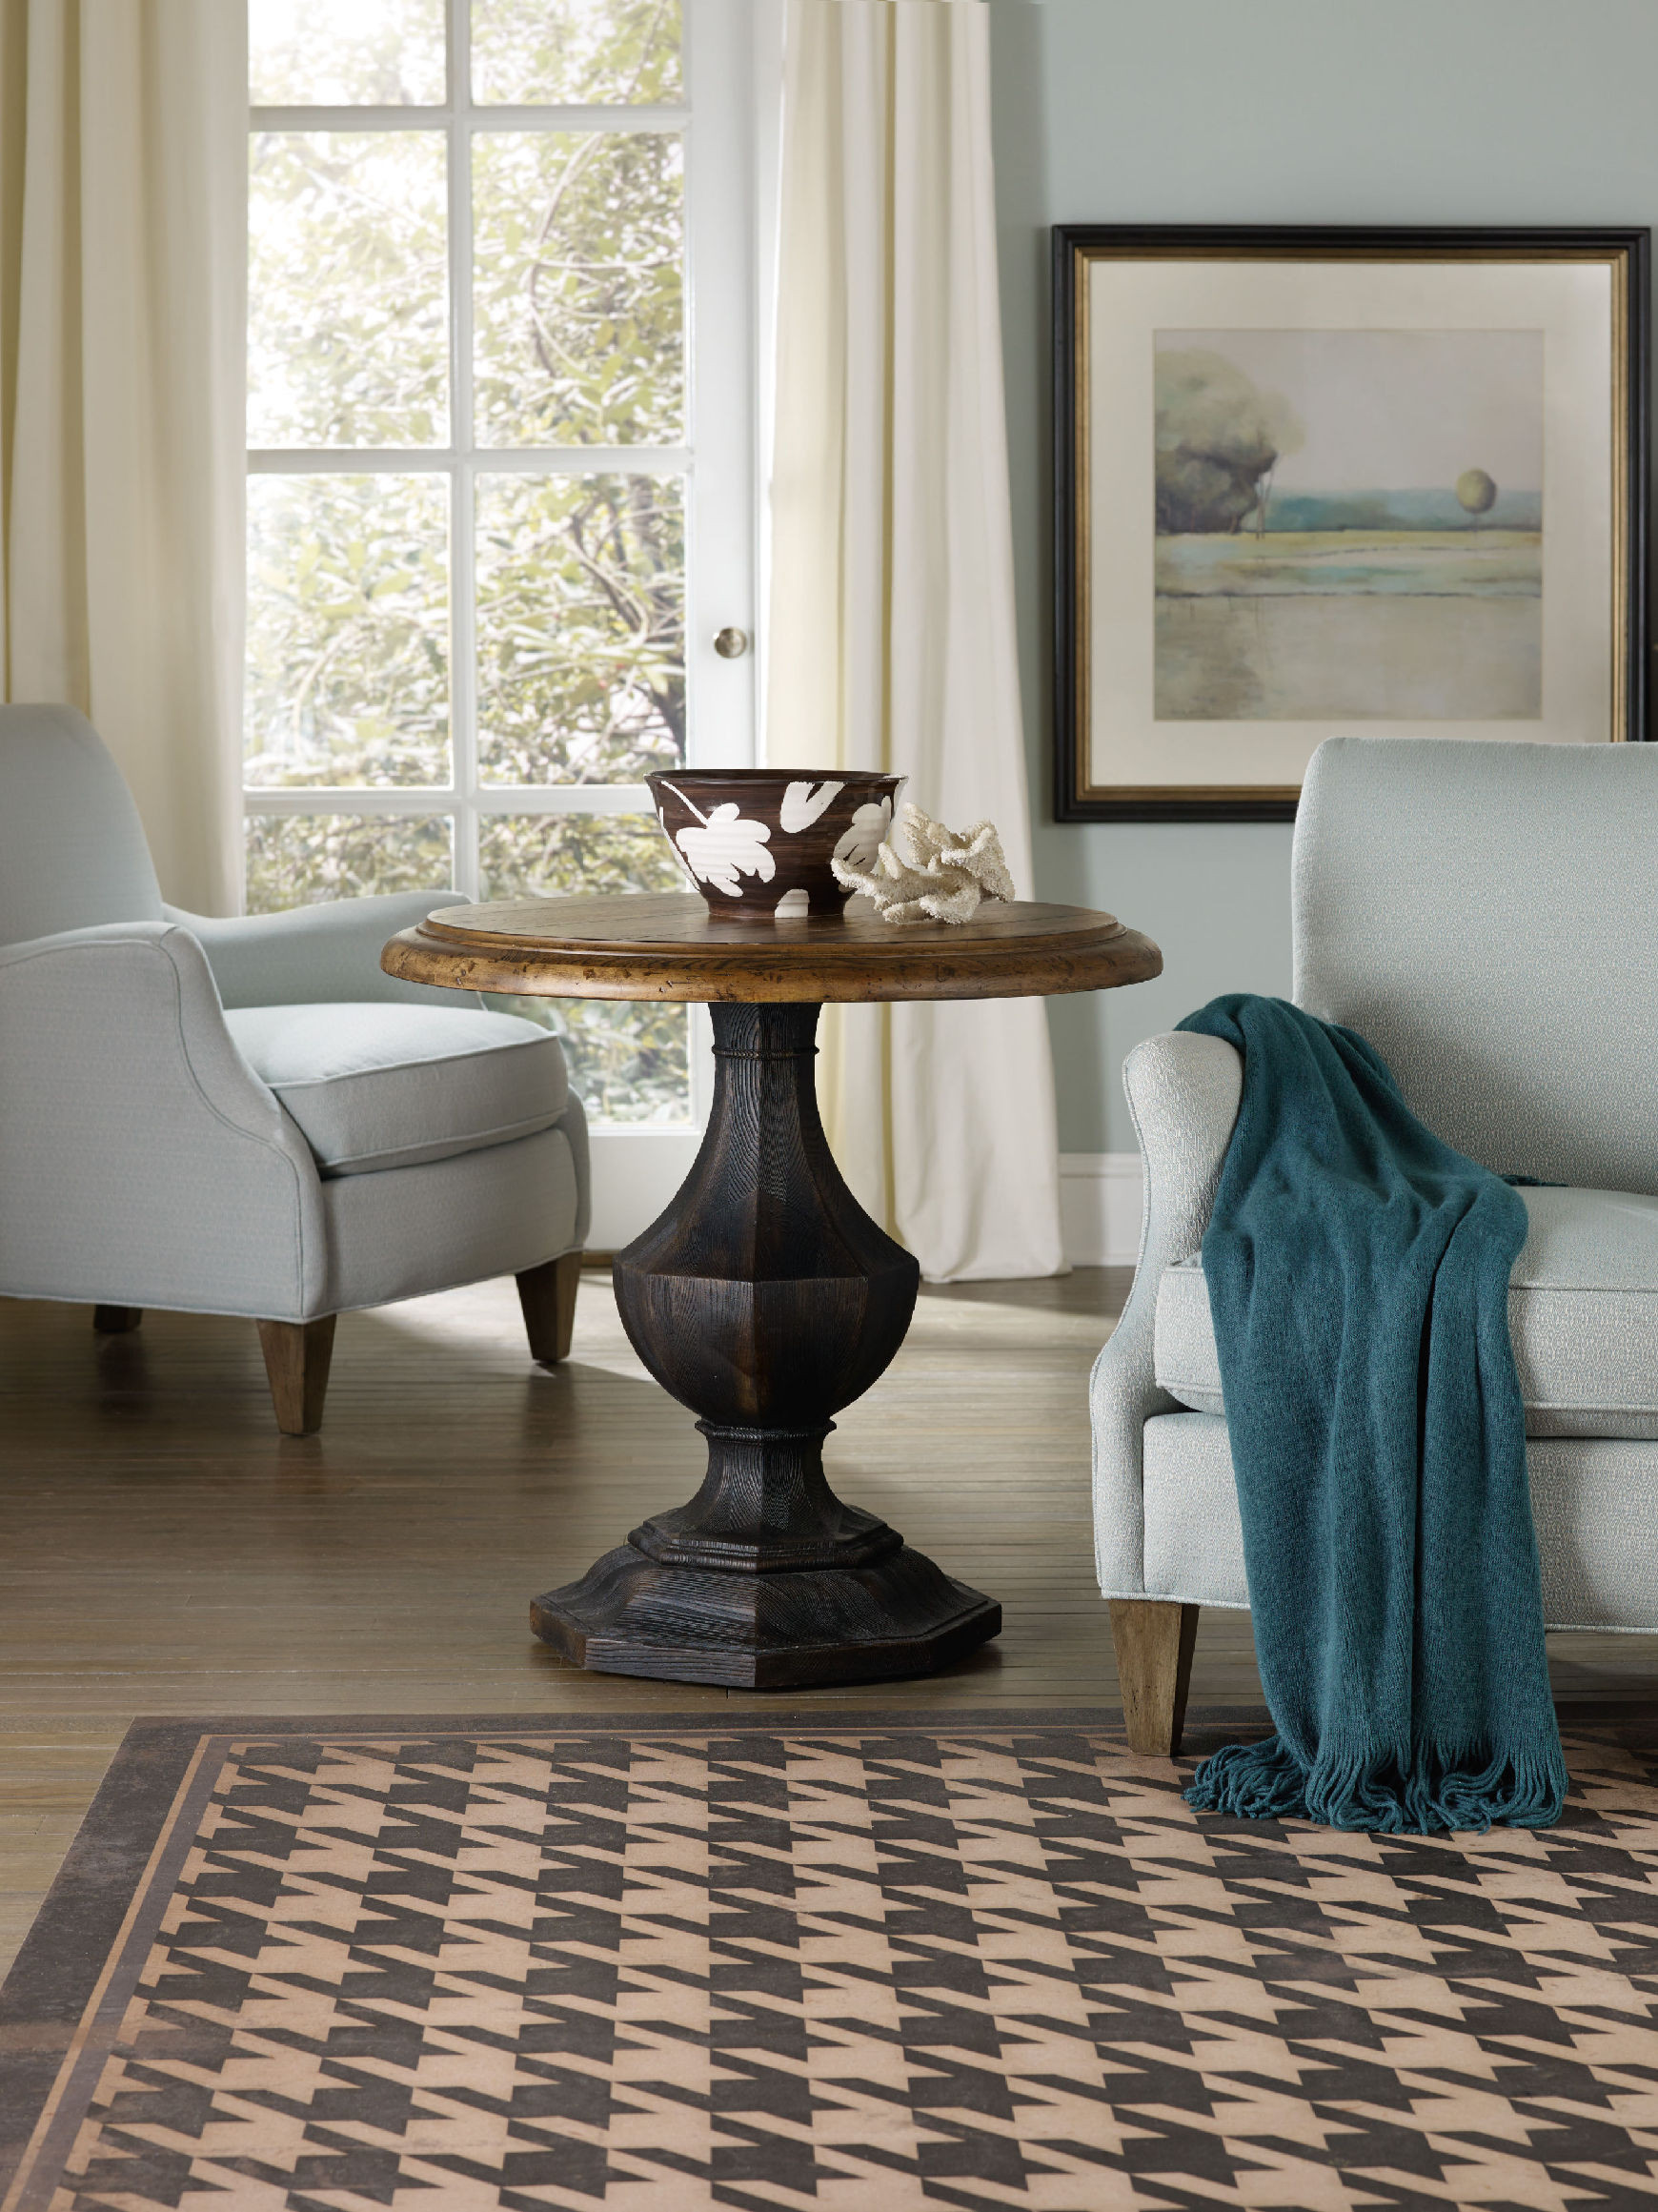 Accent Tables For Living Room
 Hooker Furniture Living Room Sanctuary Round Accent Table